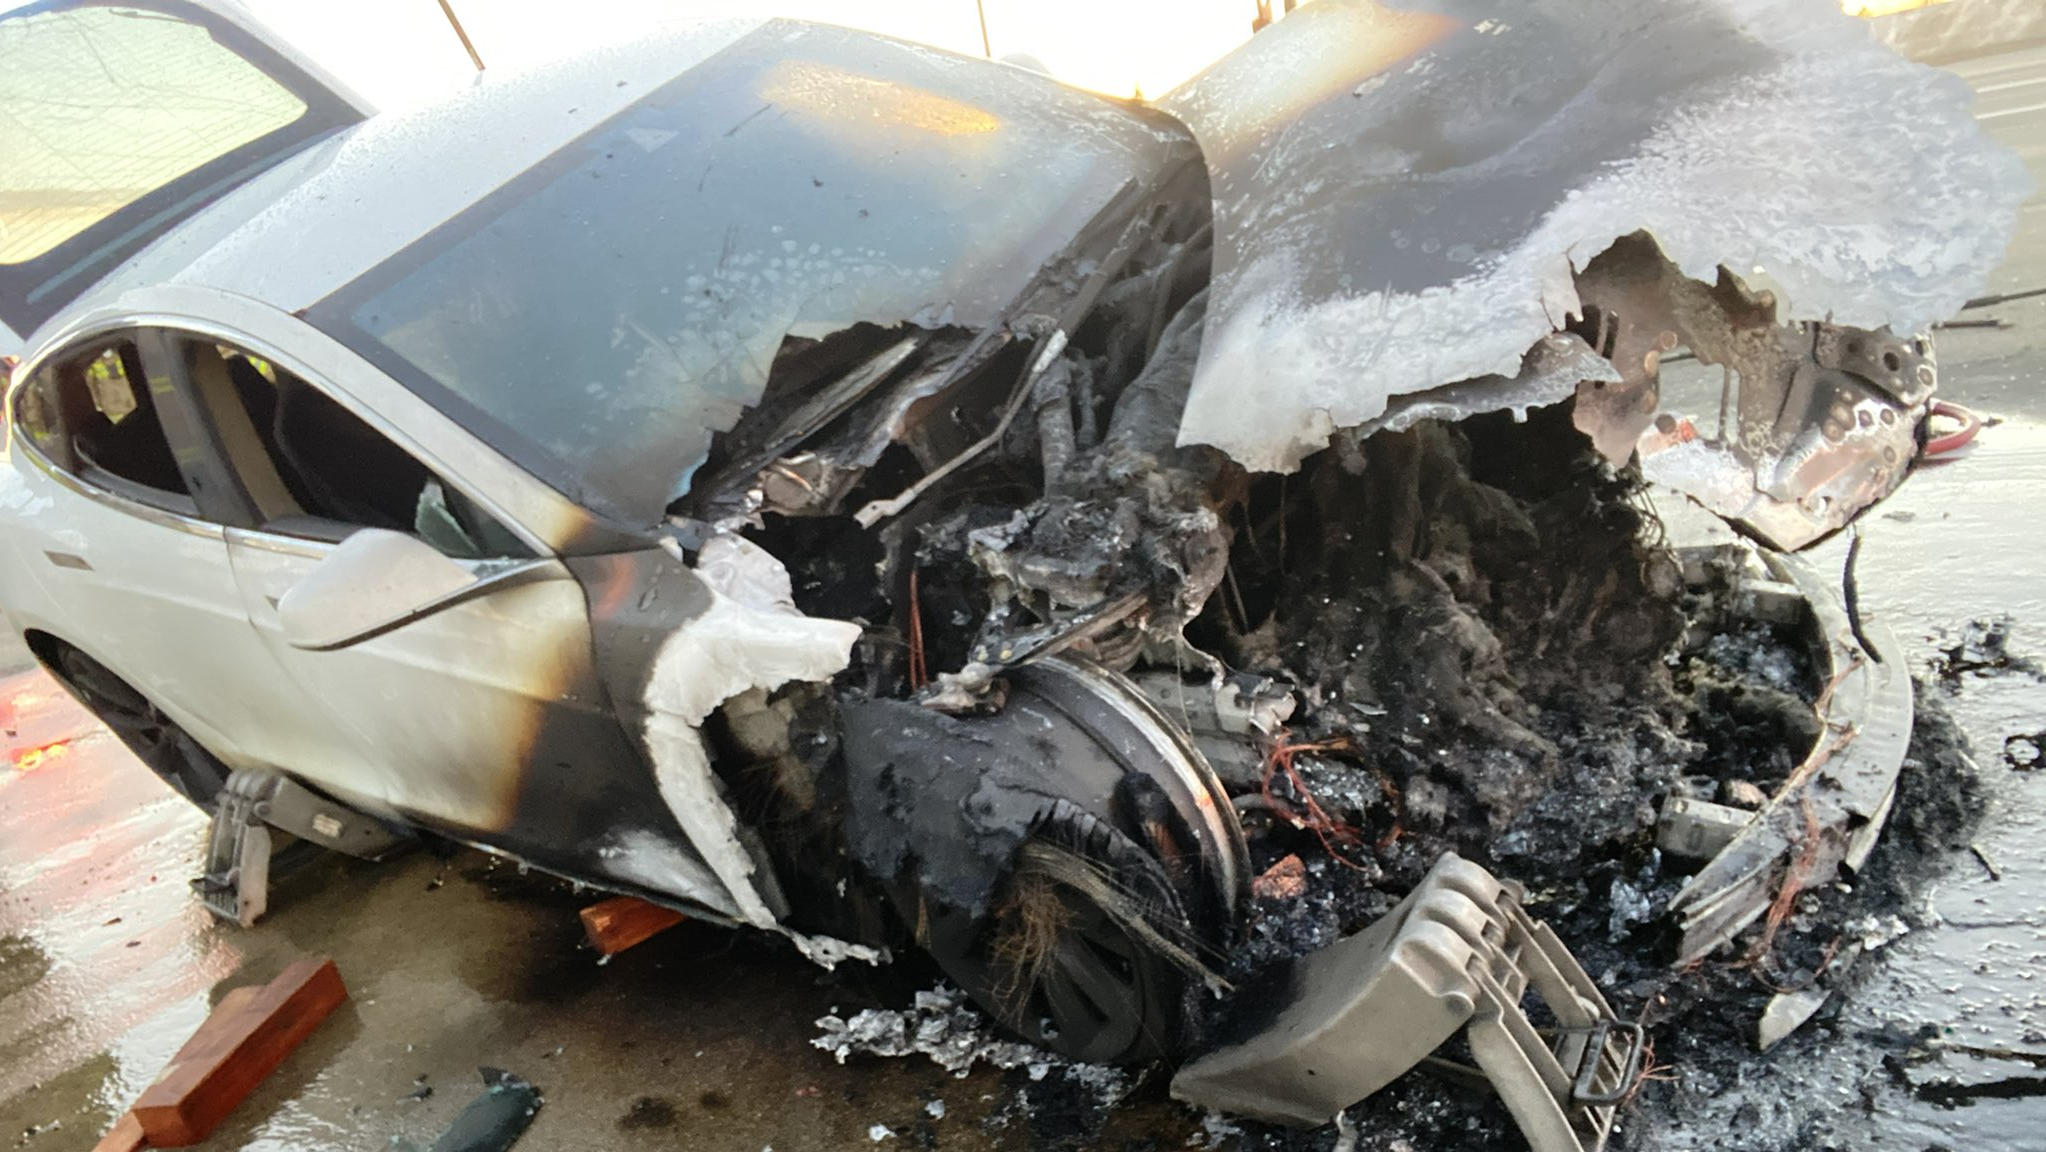 Tesla Model S Bursts Into Flames in California While Driver Was on Highway